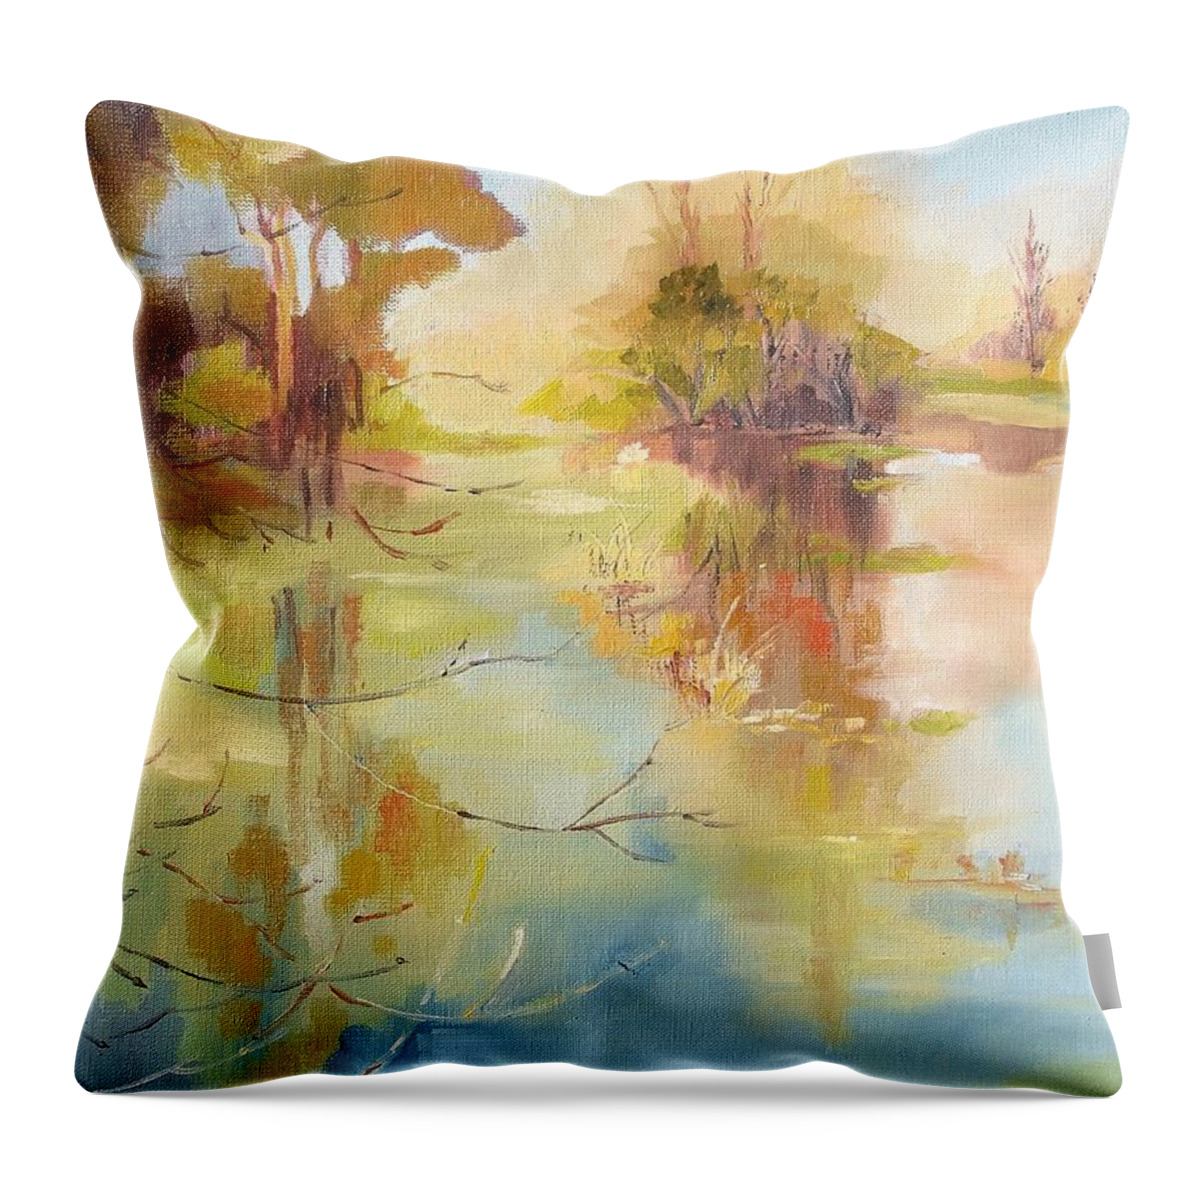  Throw Pillow featuring the painting Spring comes by Kim PARDON